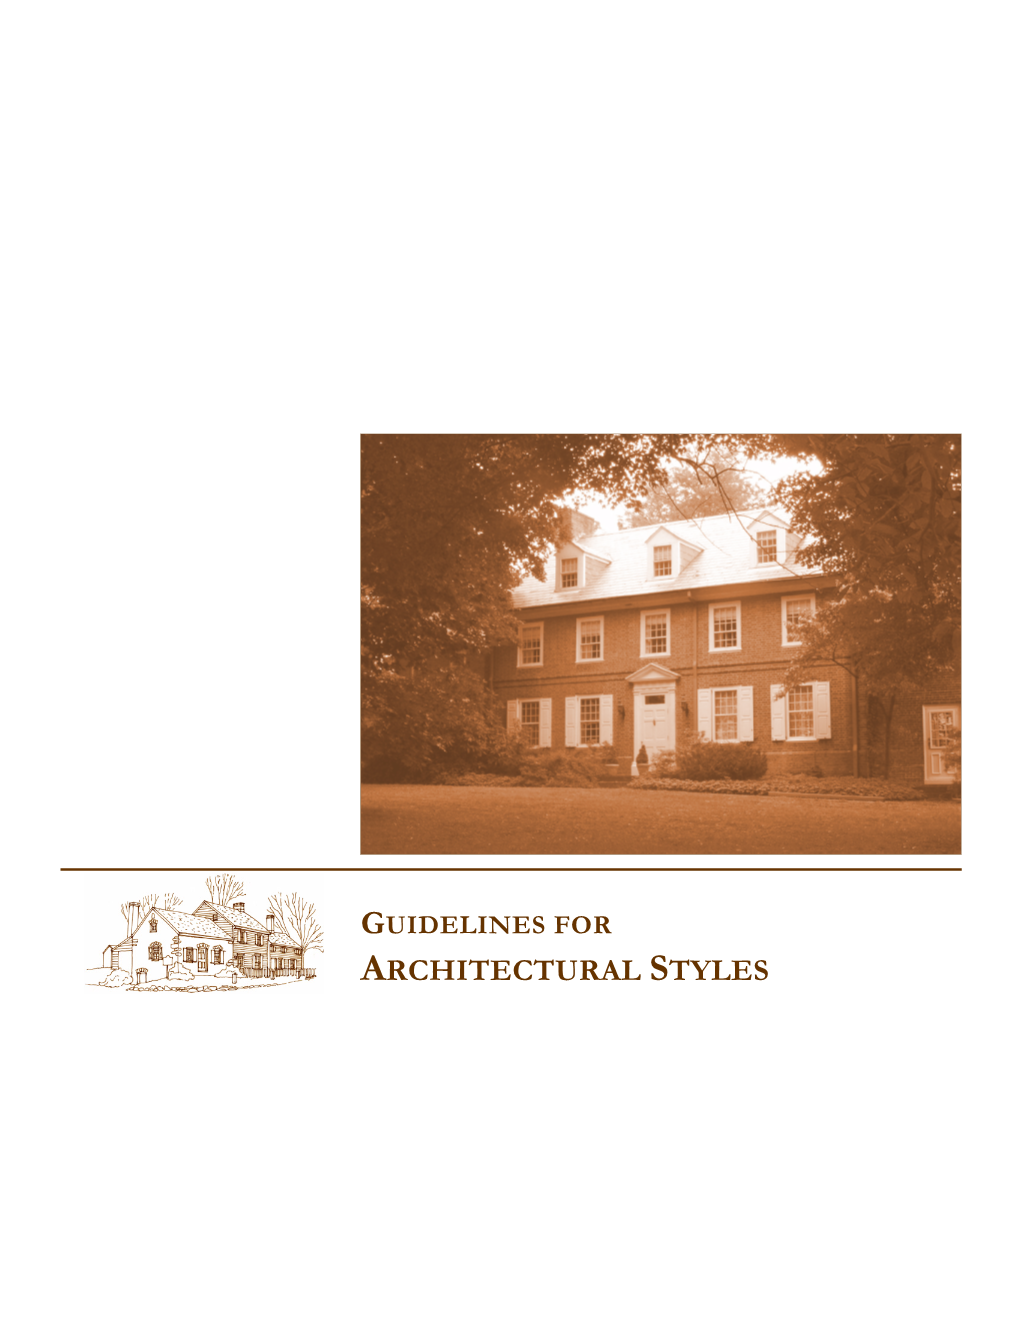 ARCHITECTURAL STYLES Township of Hopewell Historic Preservation Commission GUIDELINES for ARCHITECTURAL STYLES